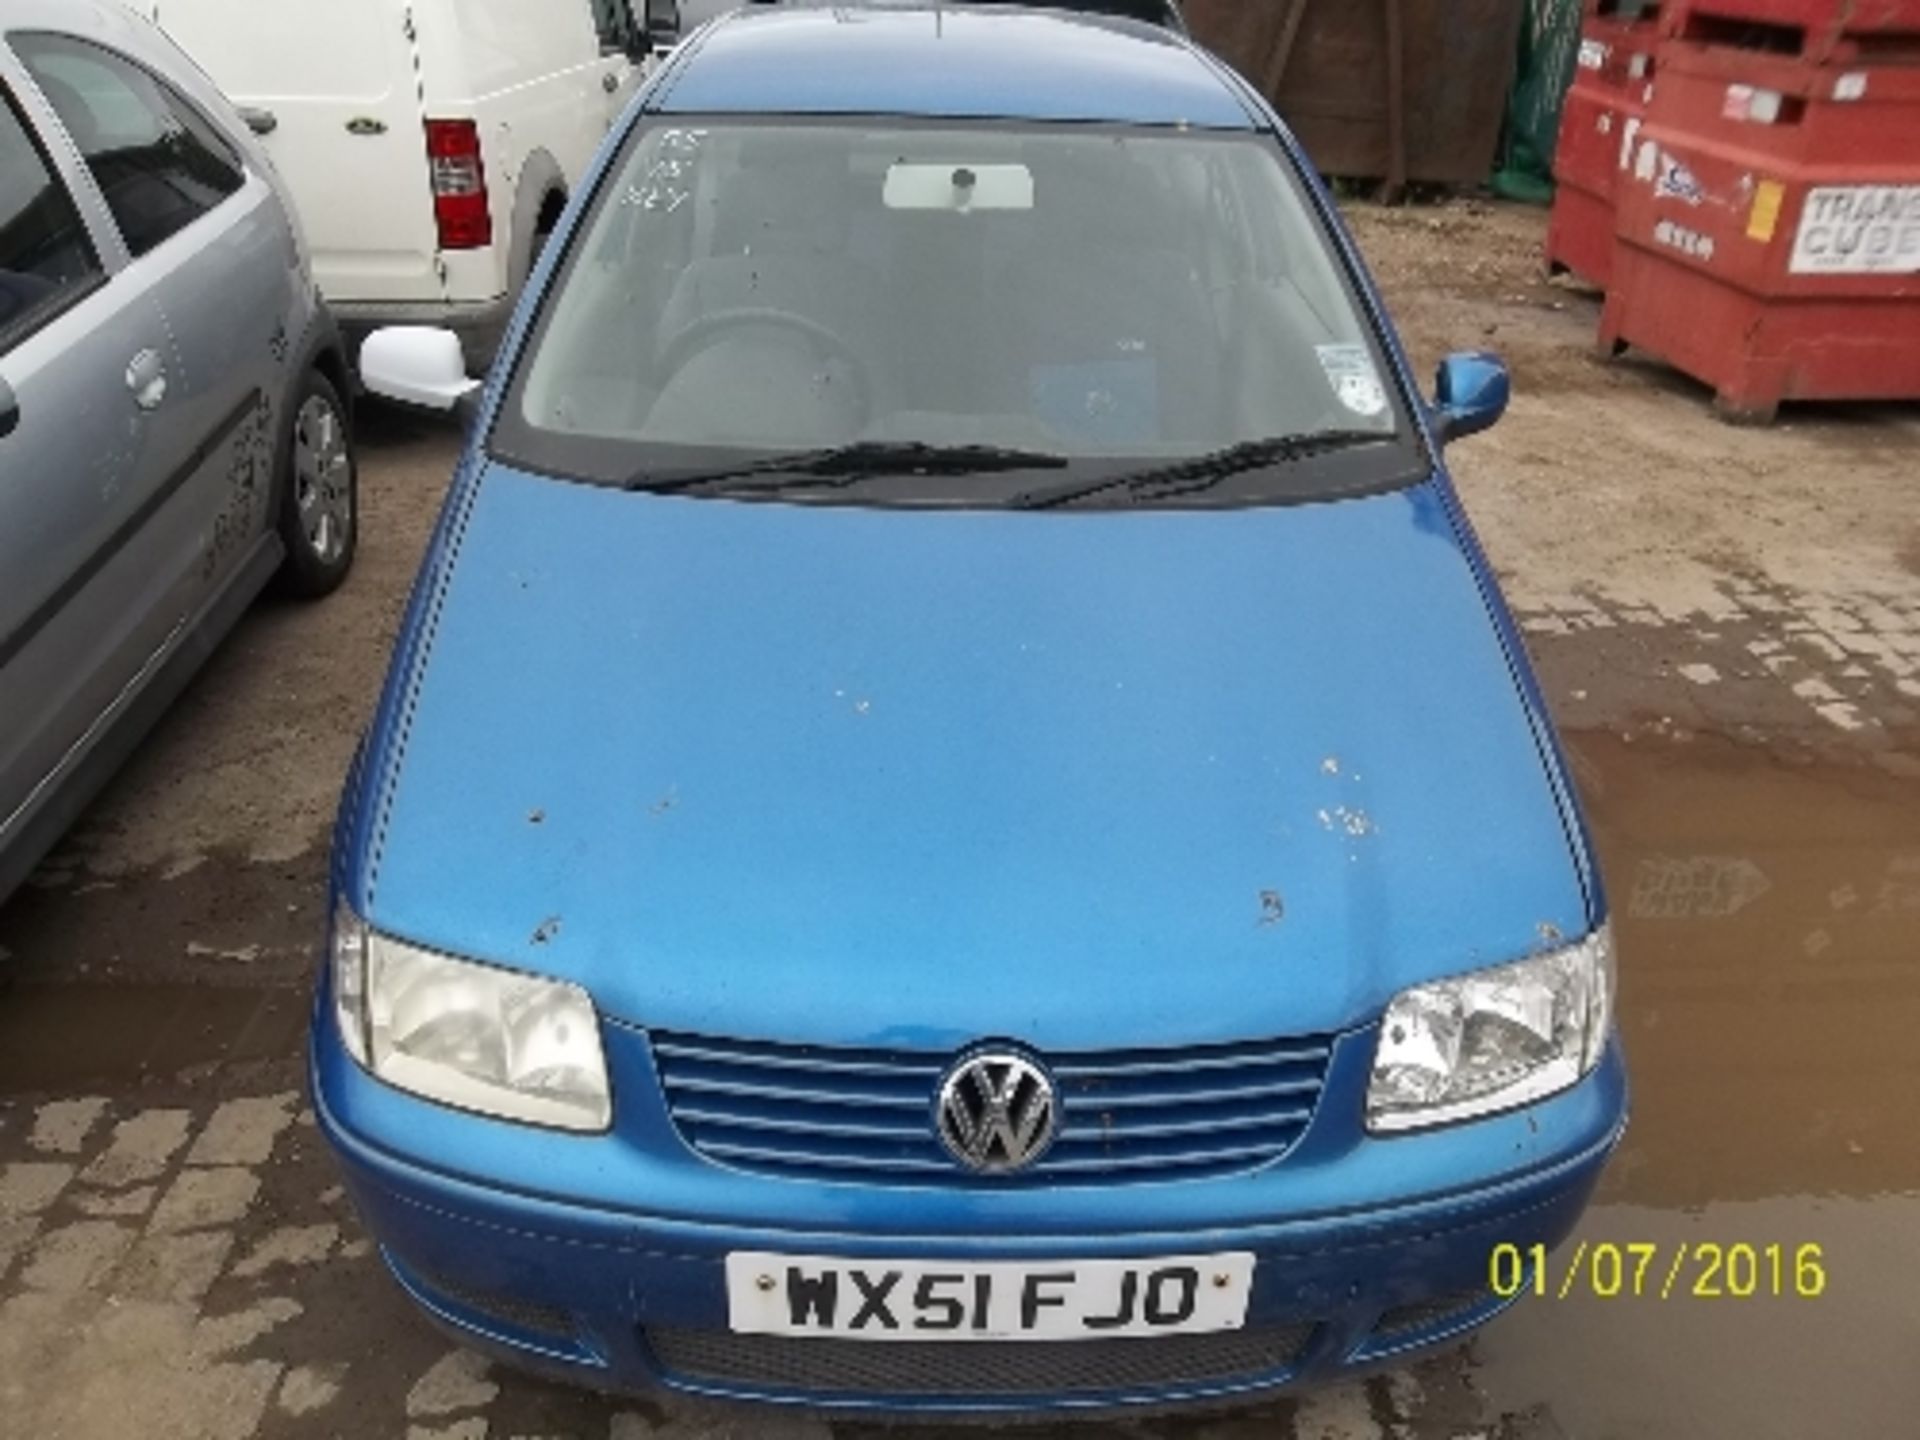 Volkswagen Polo Match - WX51 FJO Date of registration: 30.11.2001 1390cc, petrol, manual, blue